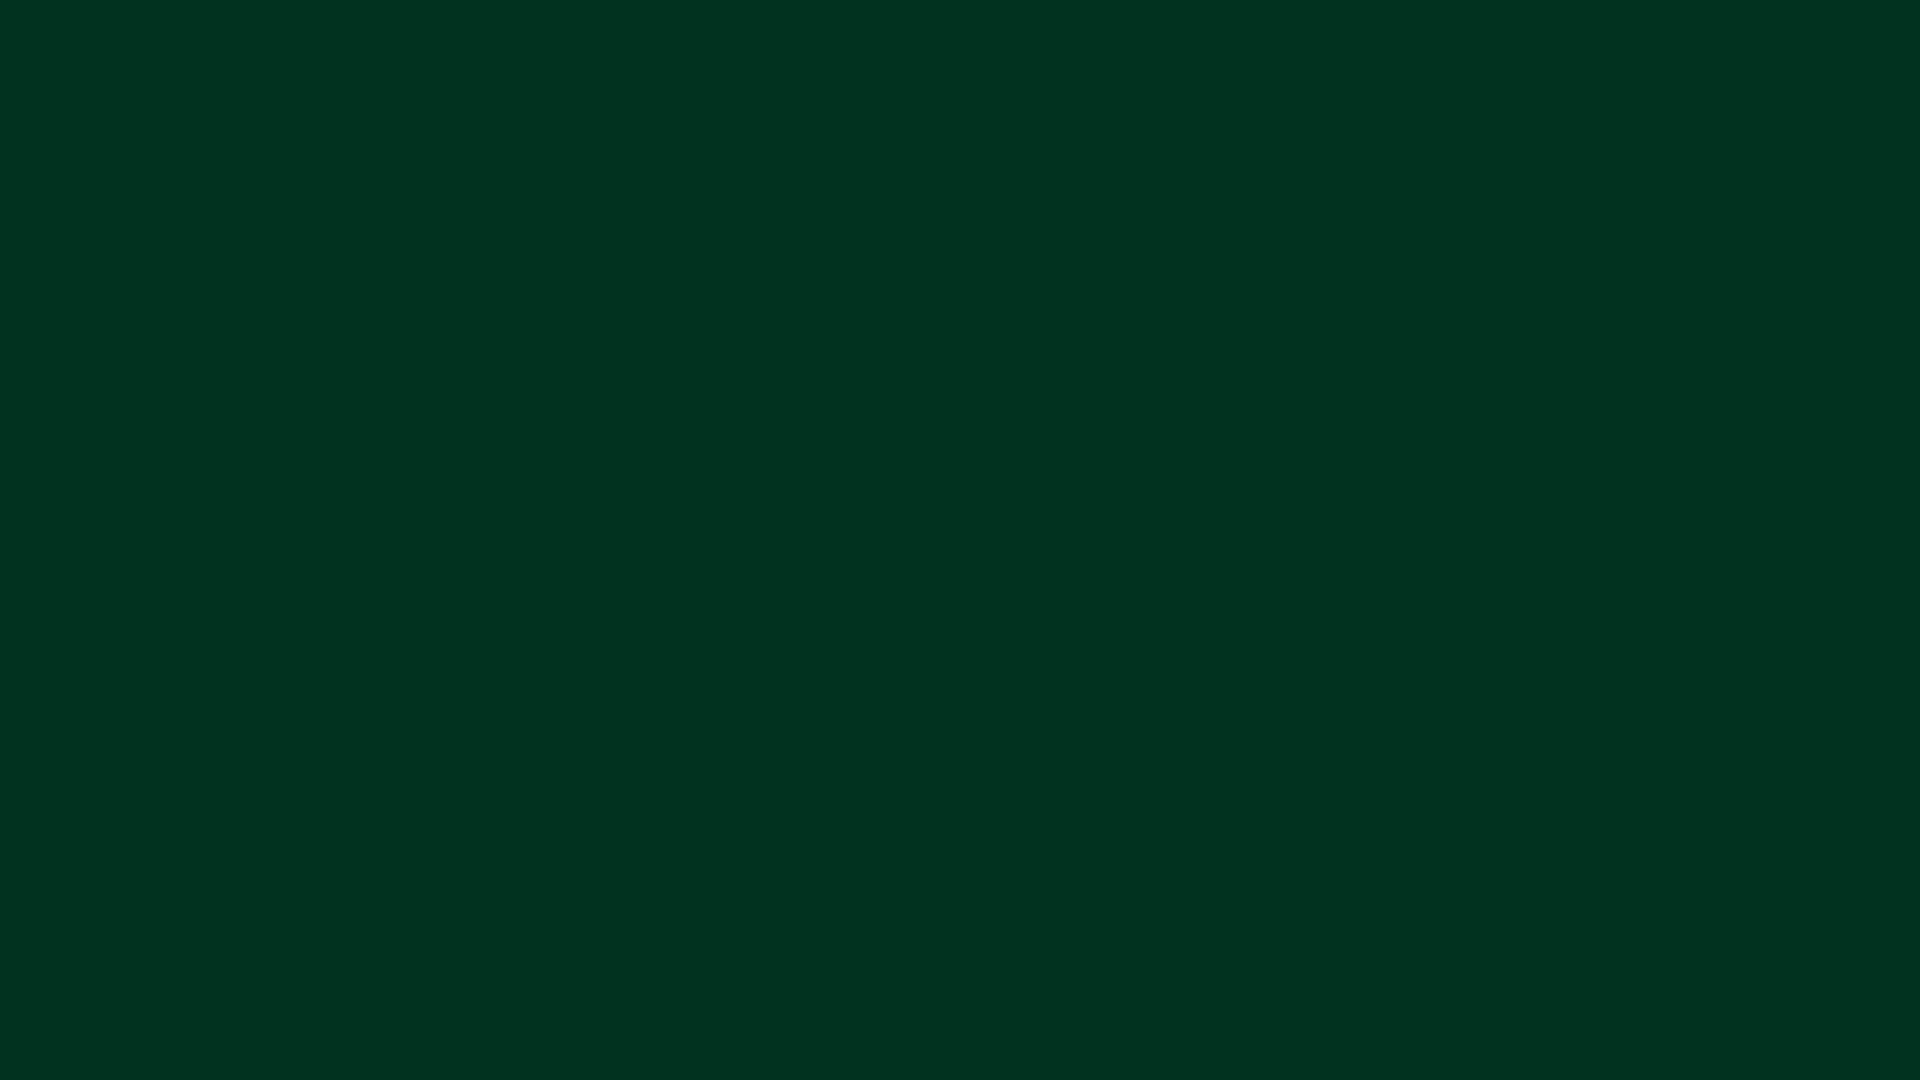 Download Dark Green Solid Color Wallpaper 2105 1920x1080 px High